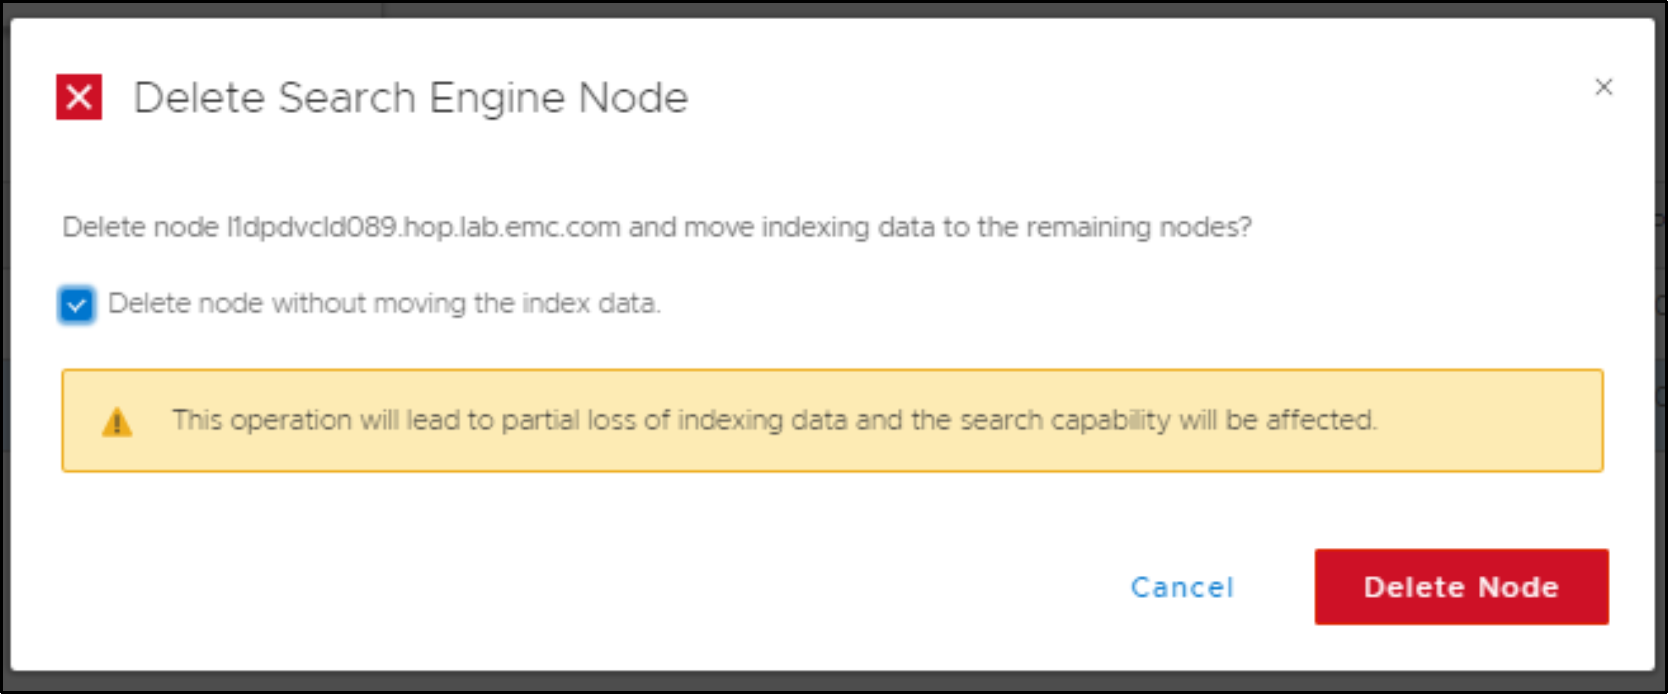 This Diagram depicts option to delete search engine node without moving indexing data to remaining node 